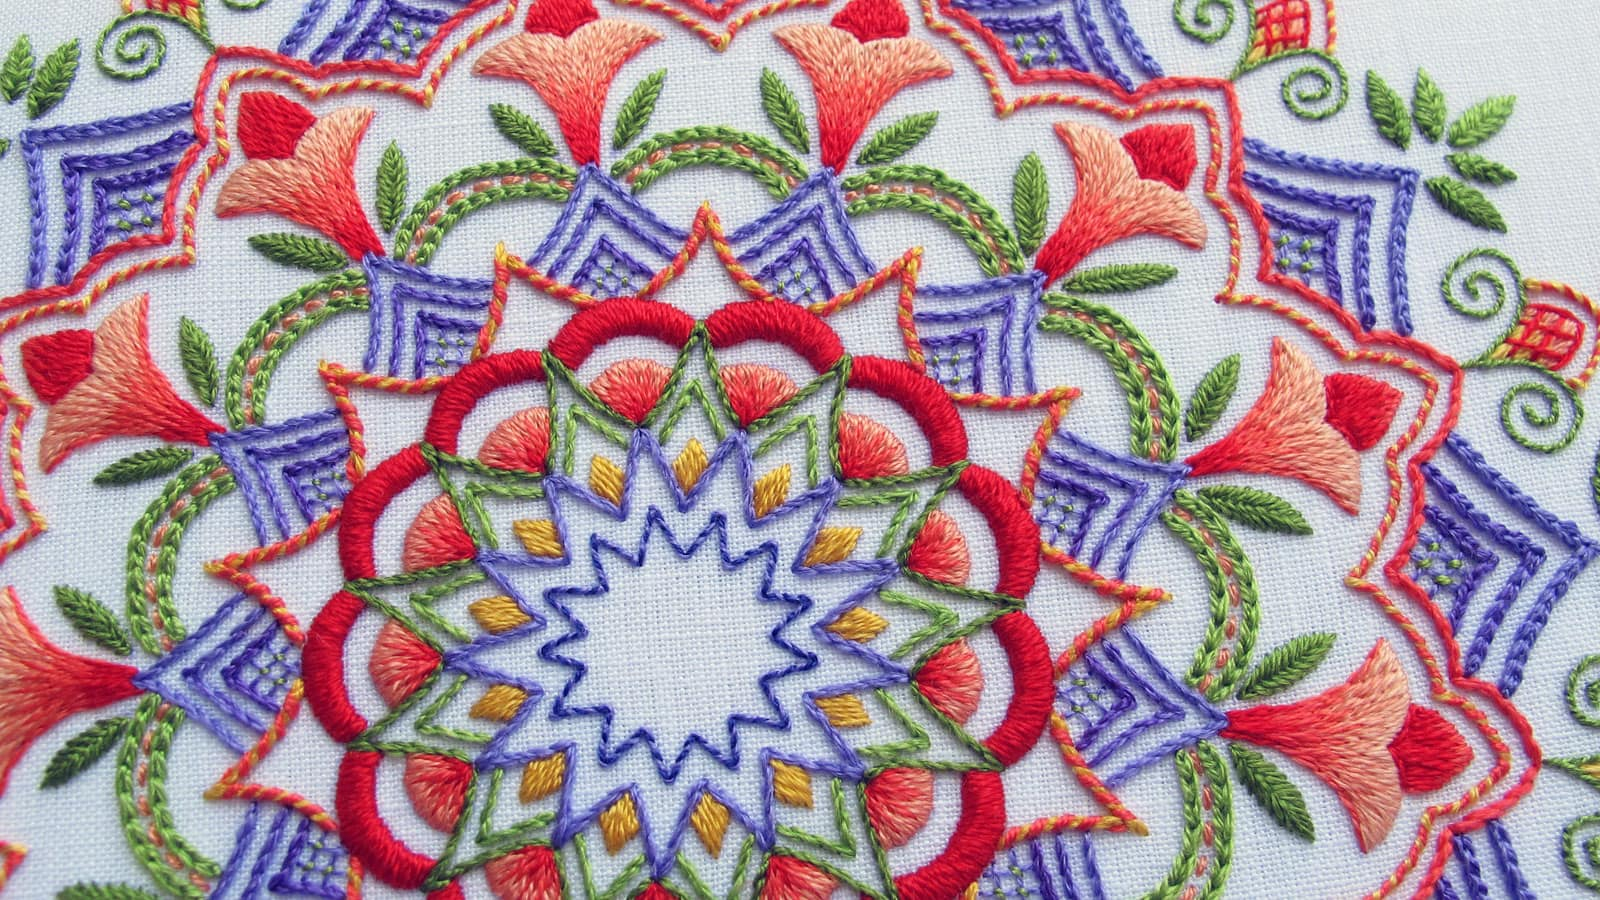 Embroidery Patterns Online Needlenthread Tips Tricks And Great Resources For Hand Embroidery